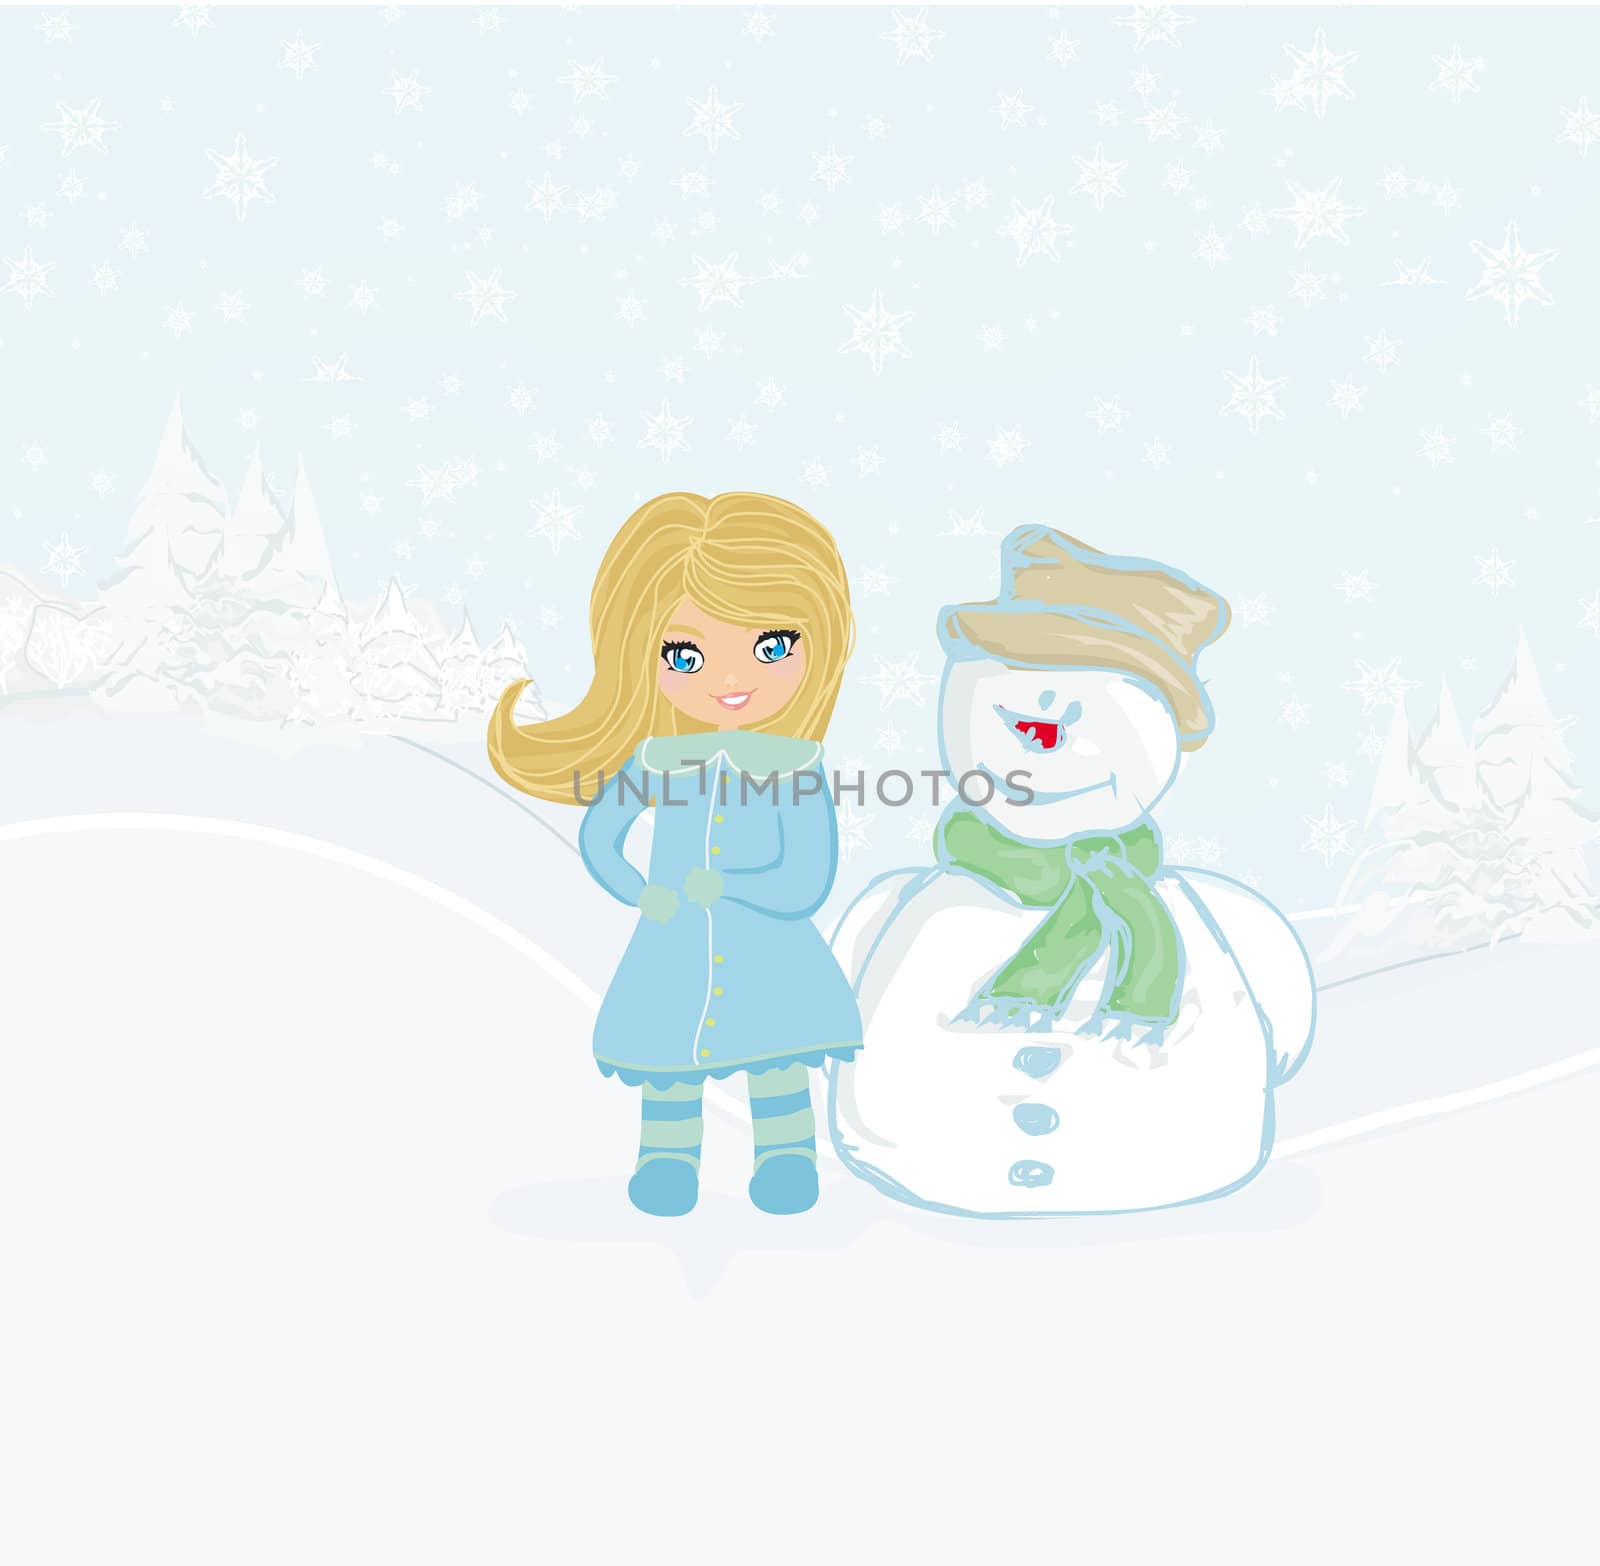 Little girl and snowman by JackyBrown